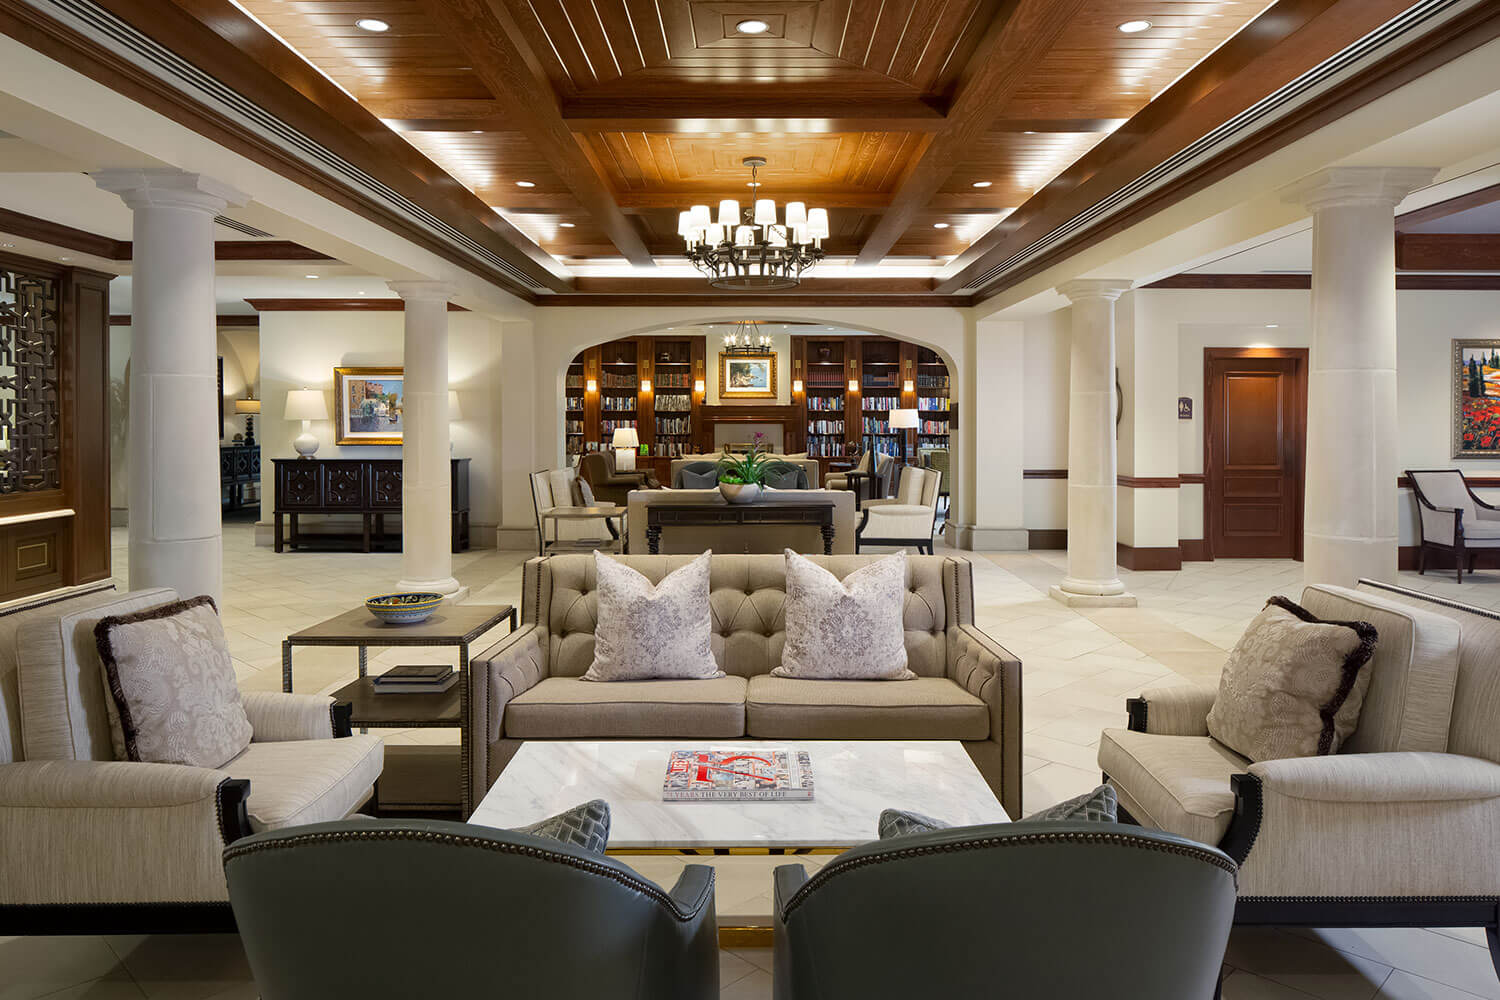 Grand foyer of Edgemere retirement community with beautiful architecture 